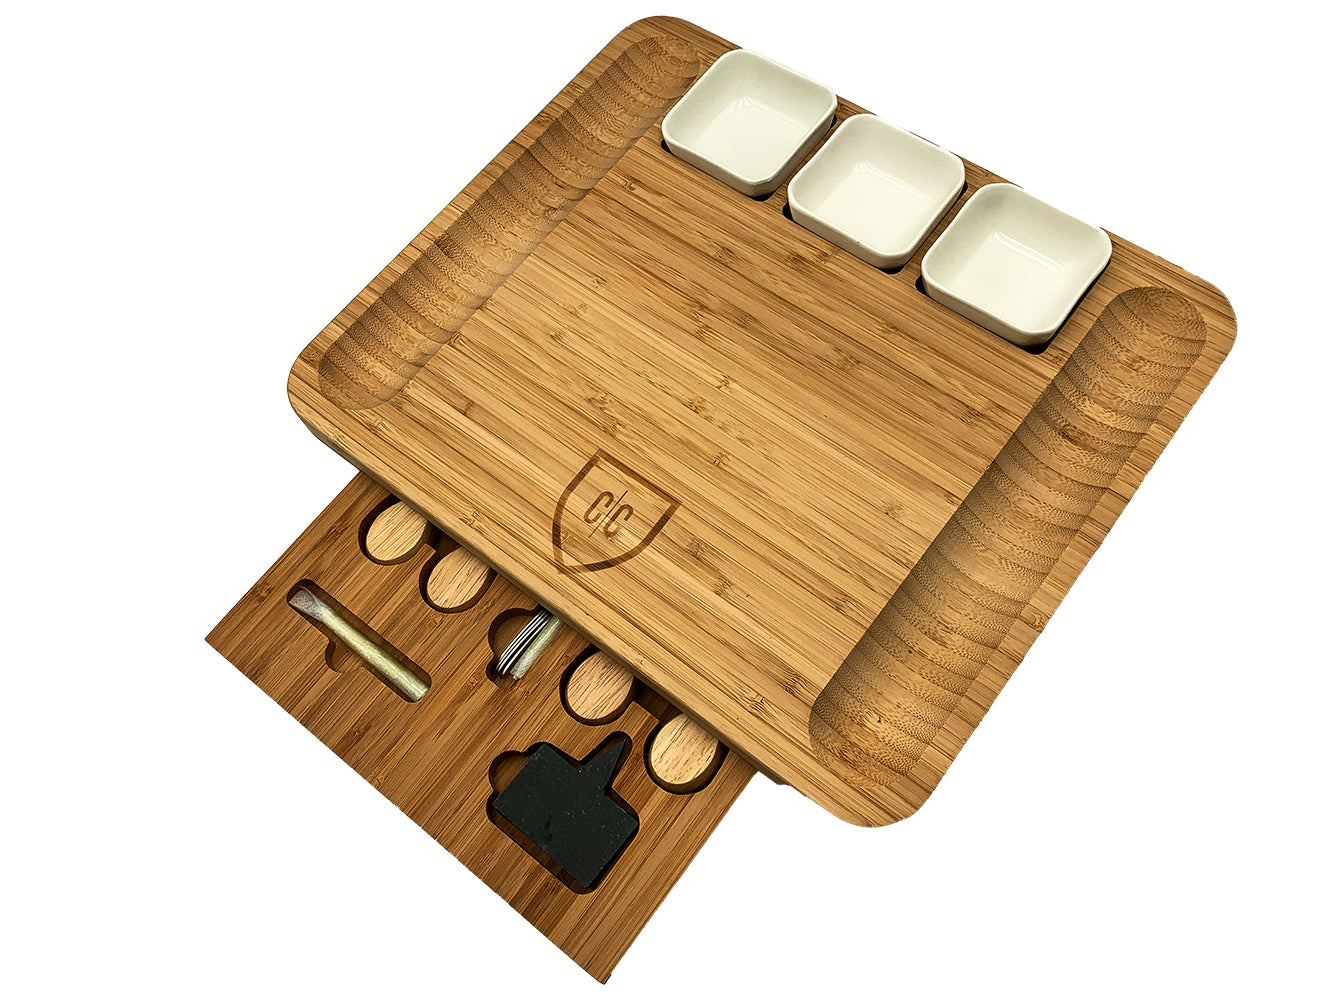 Charcuterie Serving Board Plus Knife Set by Carnivore Club USA